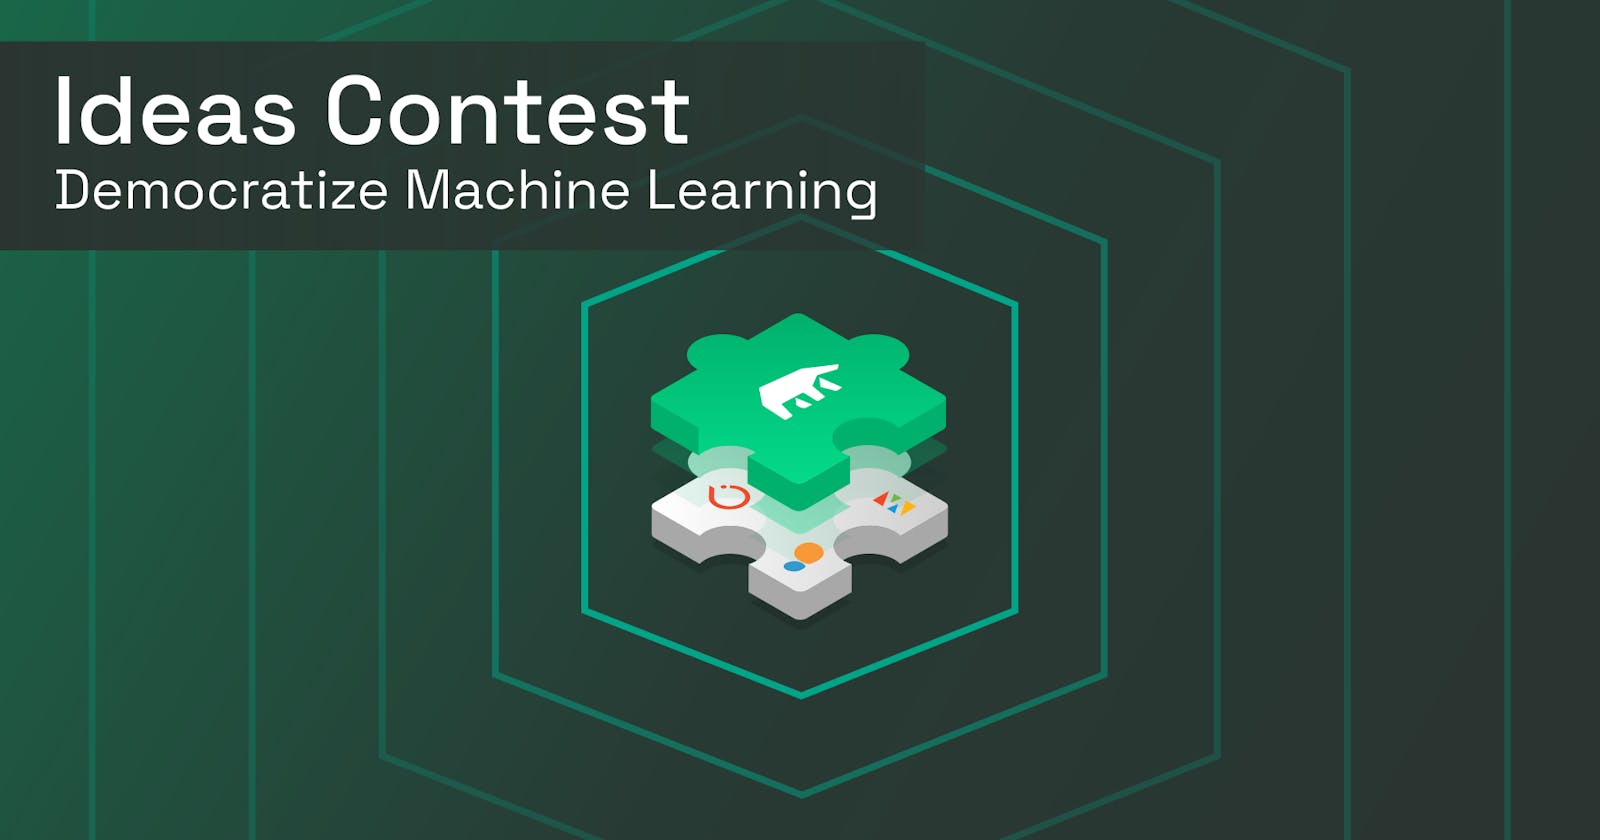 Cover Image for The contest of ideas to democratize machine learning